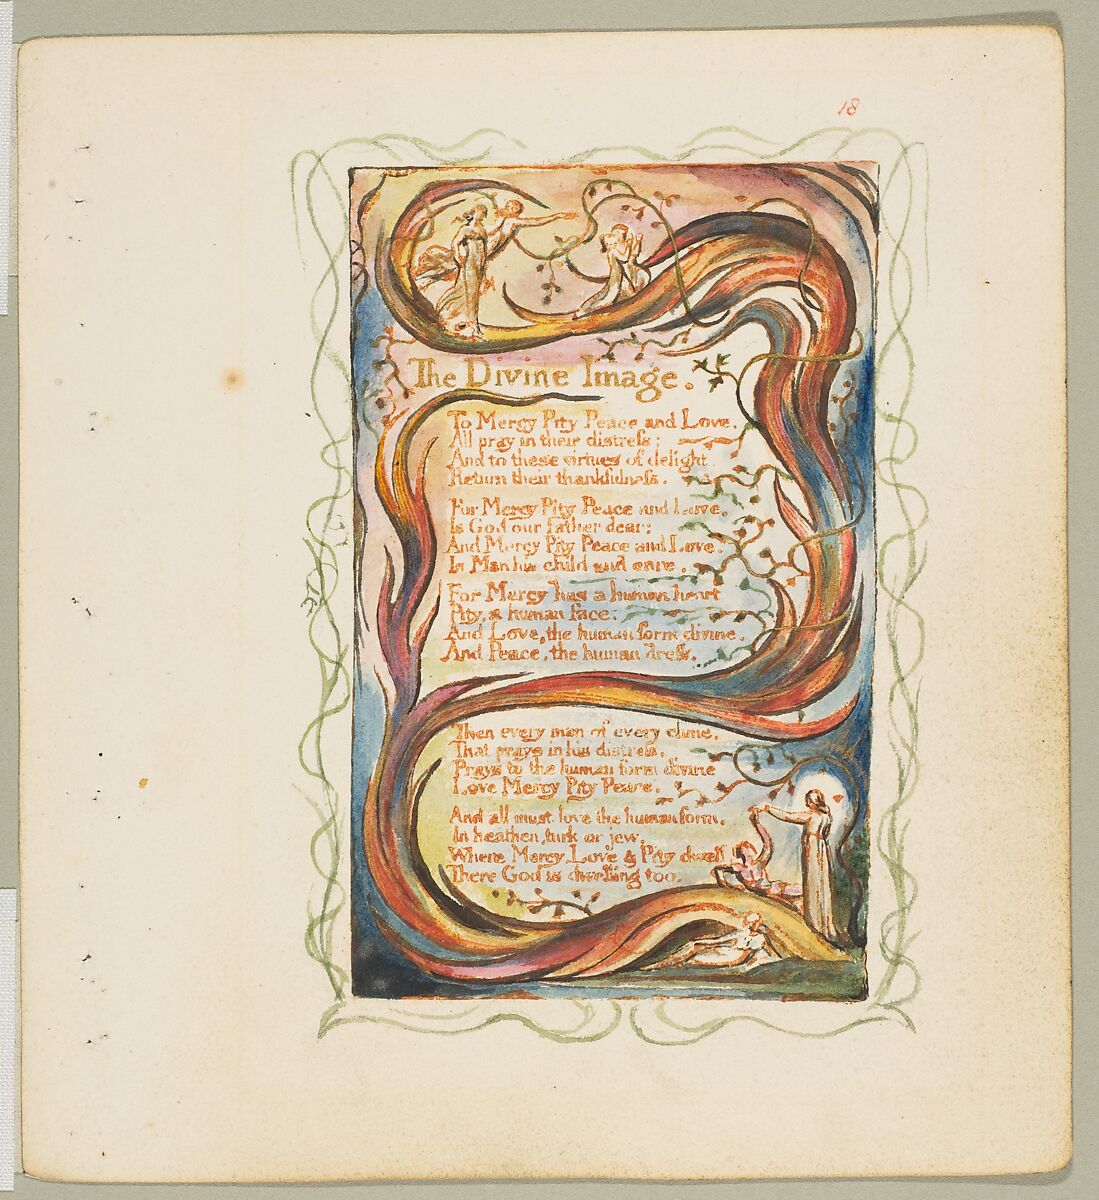 Songs of Innocence: The Divine Image, William Blake, Relief etching printed in orange-brown ink and hand-colored with watercolor and shell gold